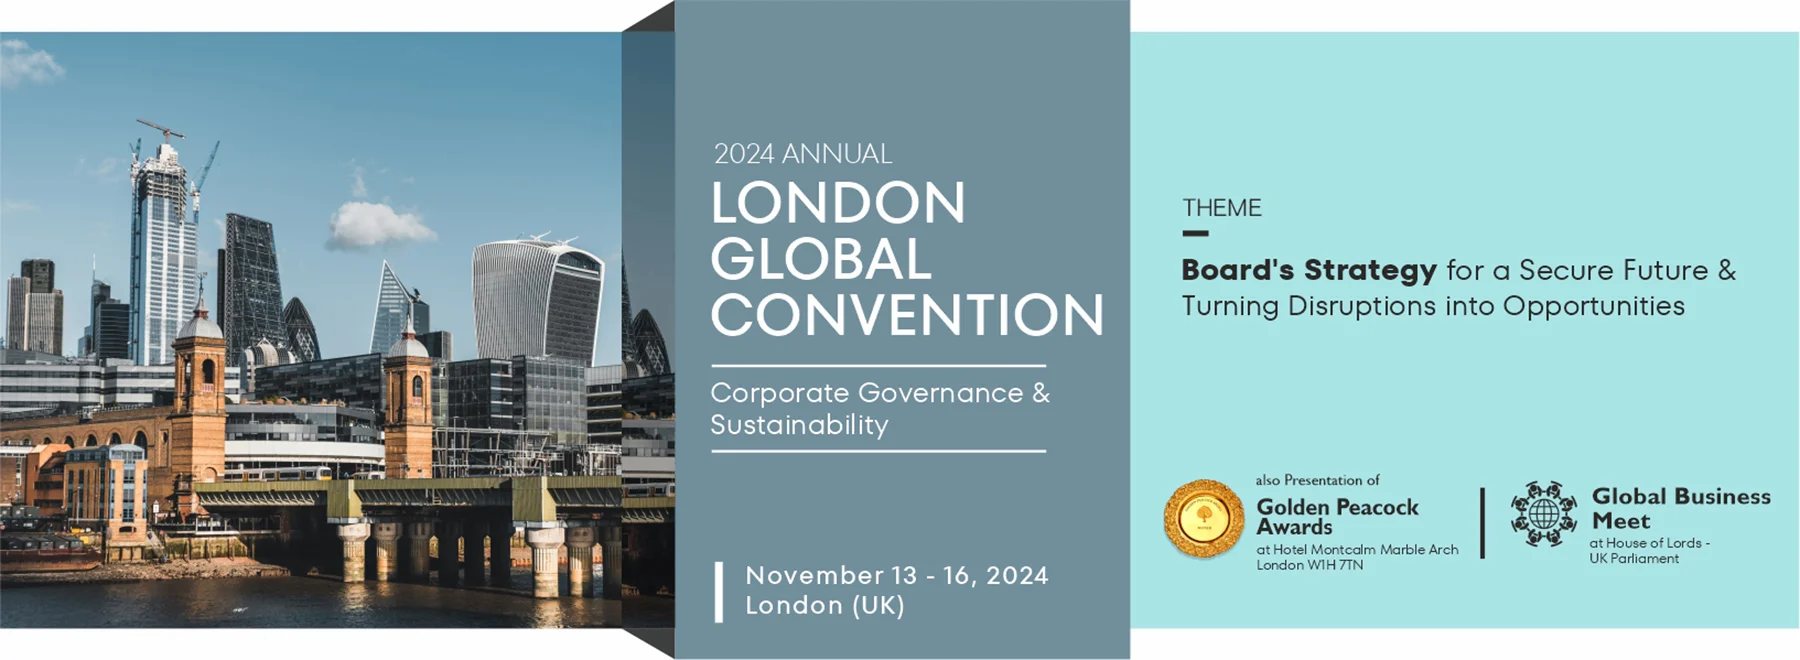 2024 London Global Convention on Corporate Governance & Sustainability